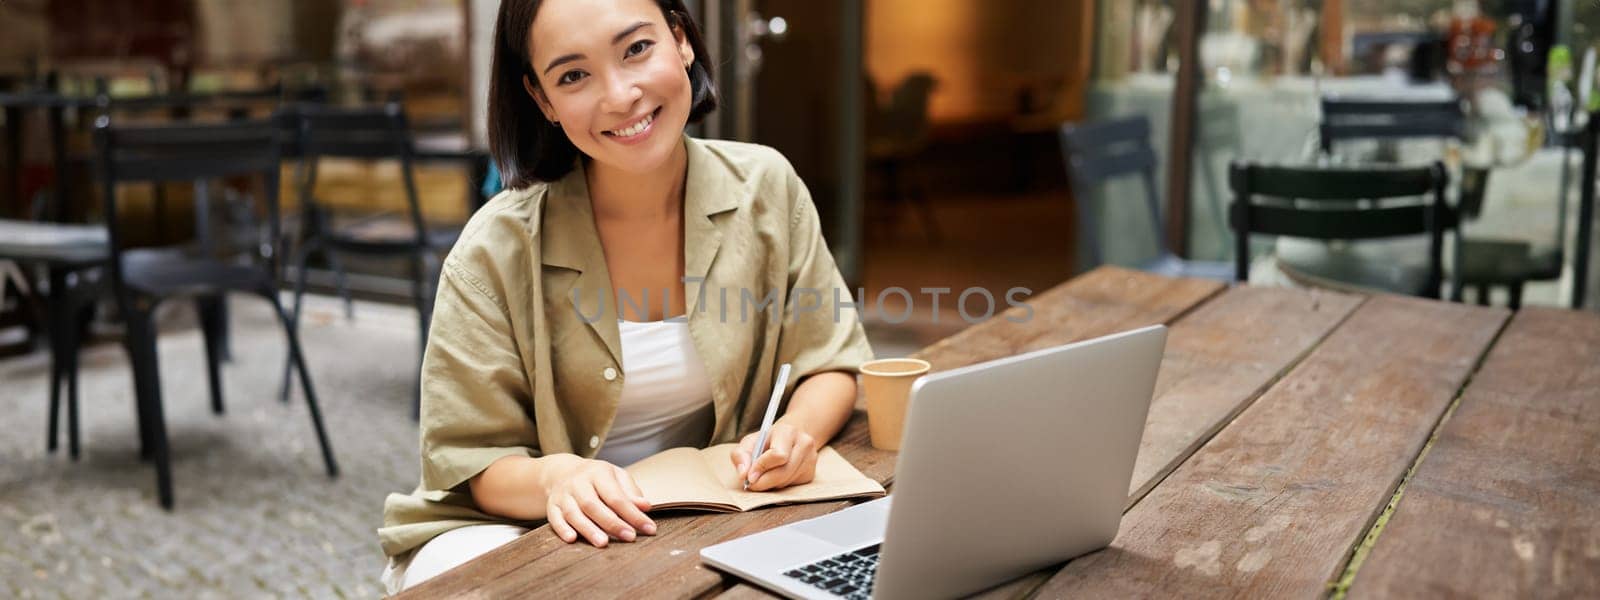 Portrait of young woman sitting in cafe with laptop, making notes, smiling at camera, working, having online meeting.